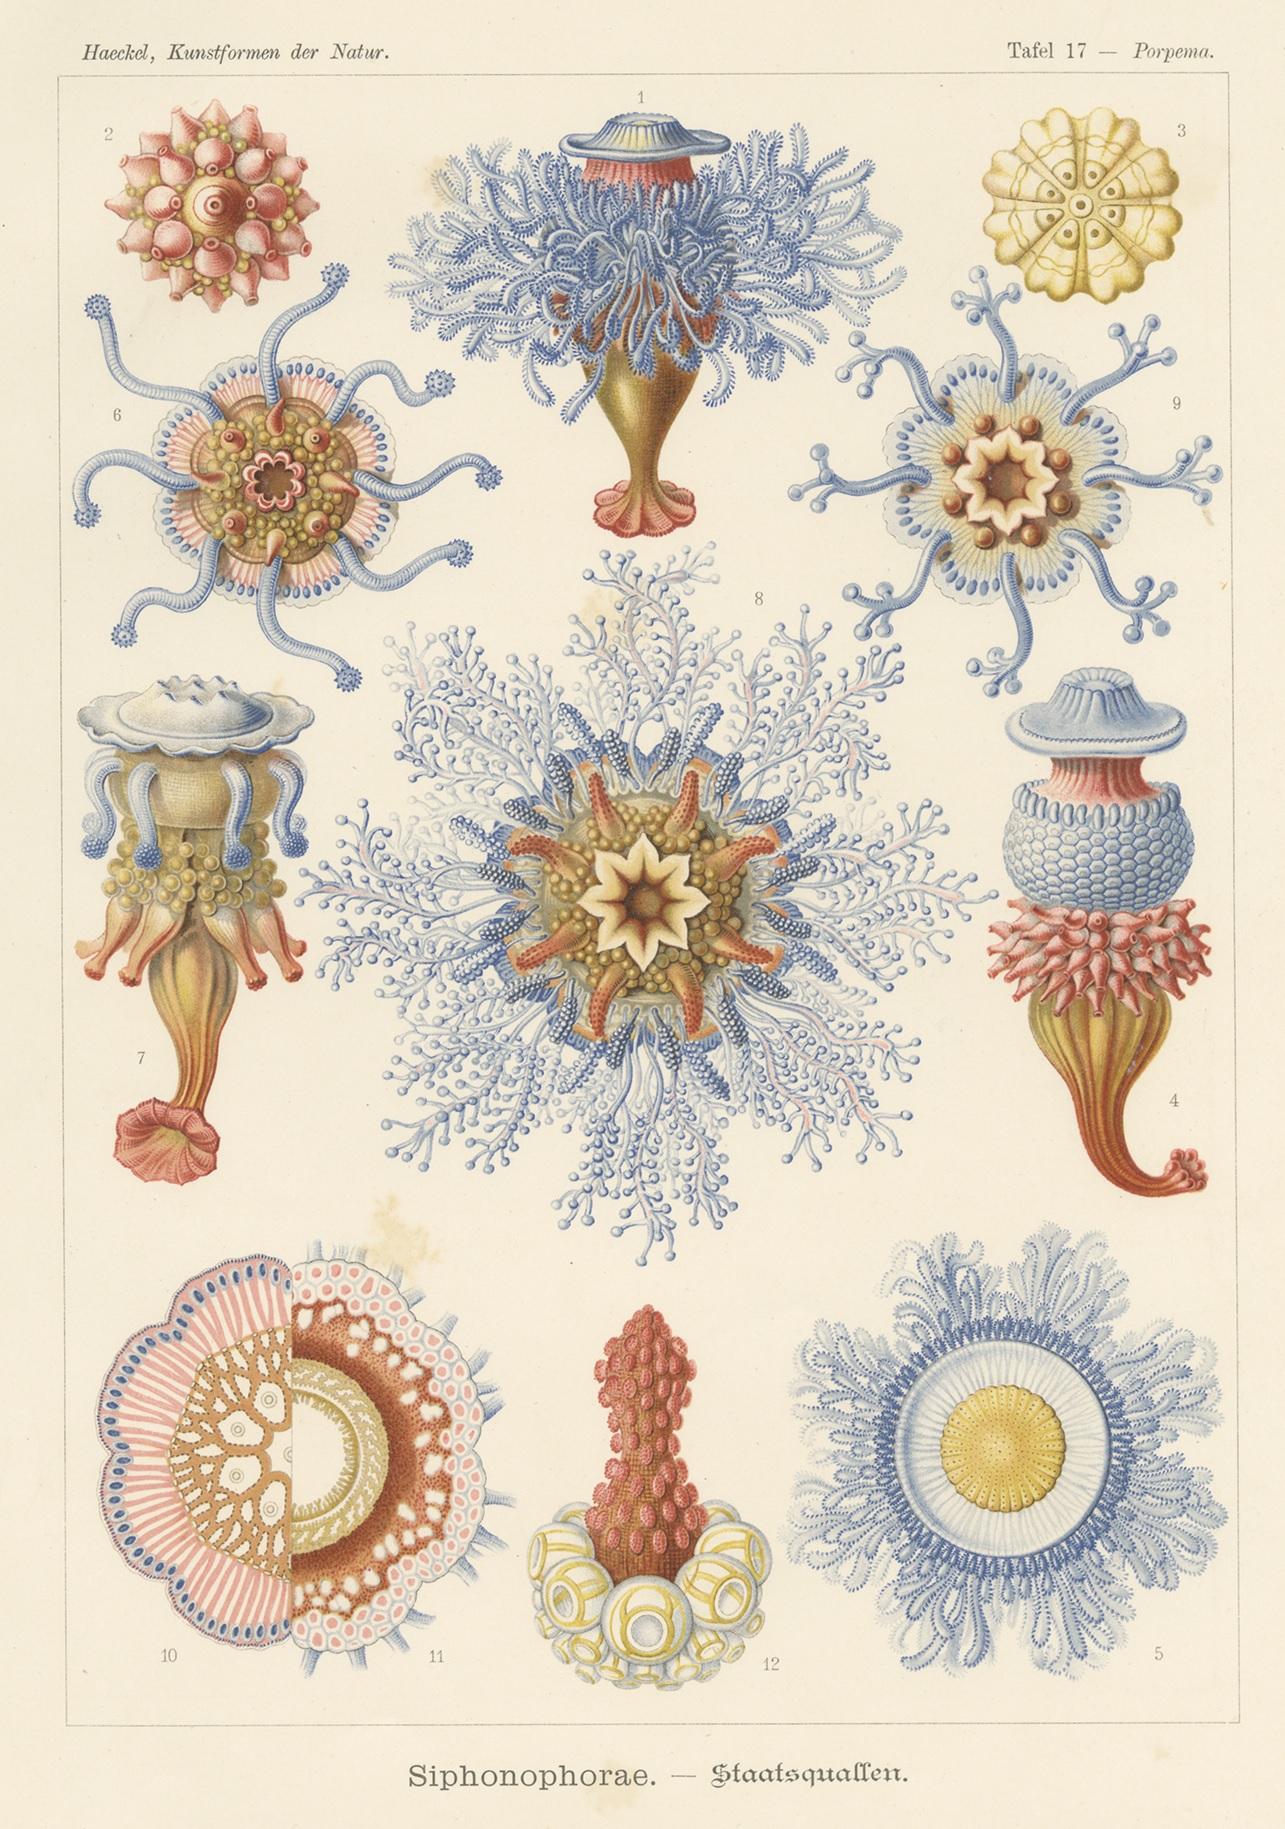 Antique print titled 'Siphonophorae - Staatsquallen'. Lithograph of Siphonophores. Siphonophores belong to the Cnidaria, a group of animals that includes the corals, hydroids, and true jellyfish. This print originates from 'Kunstformen der Natur or